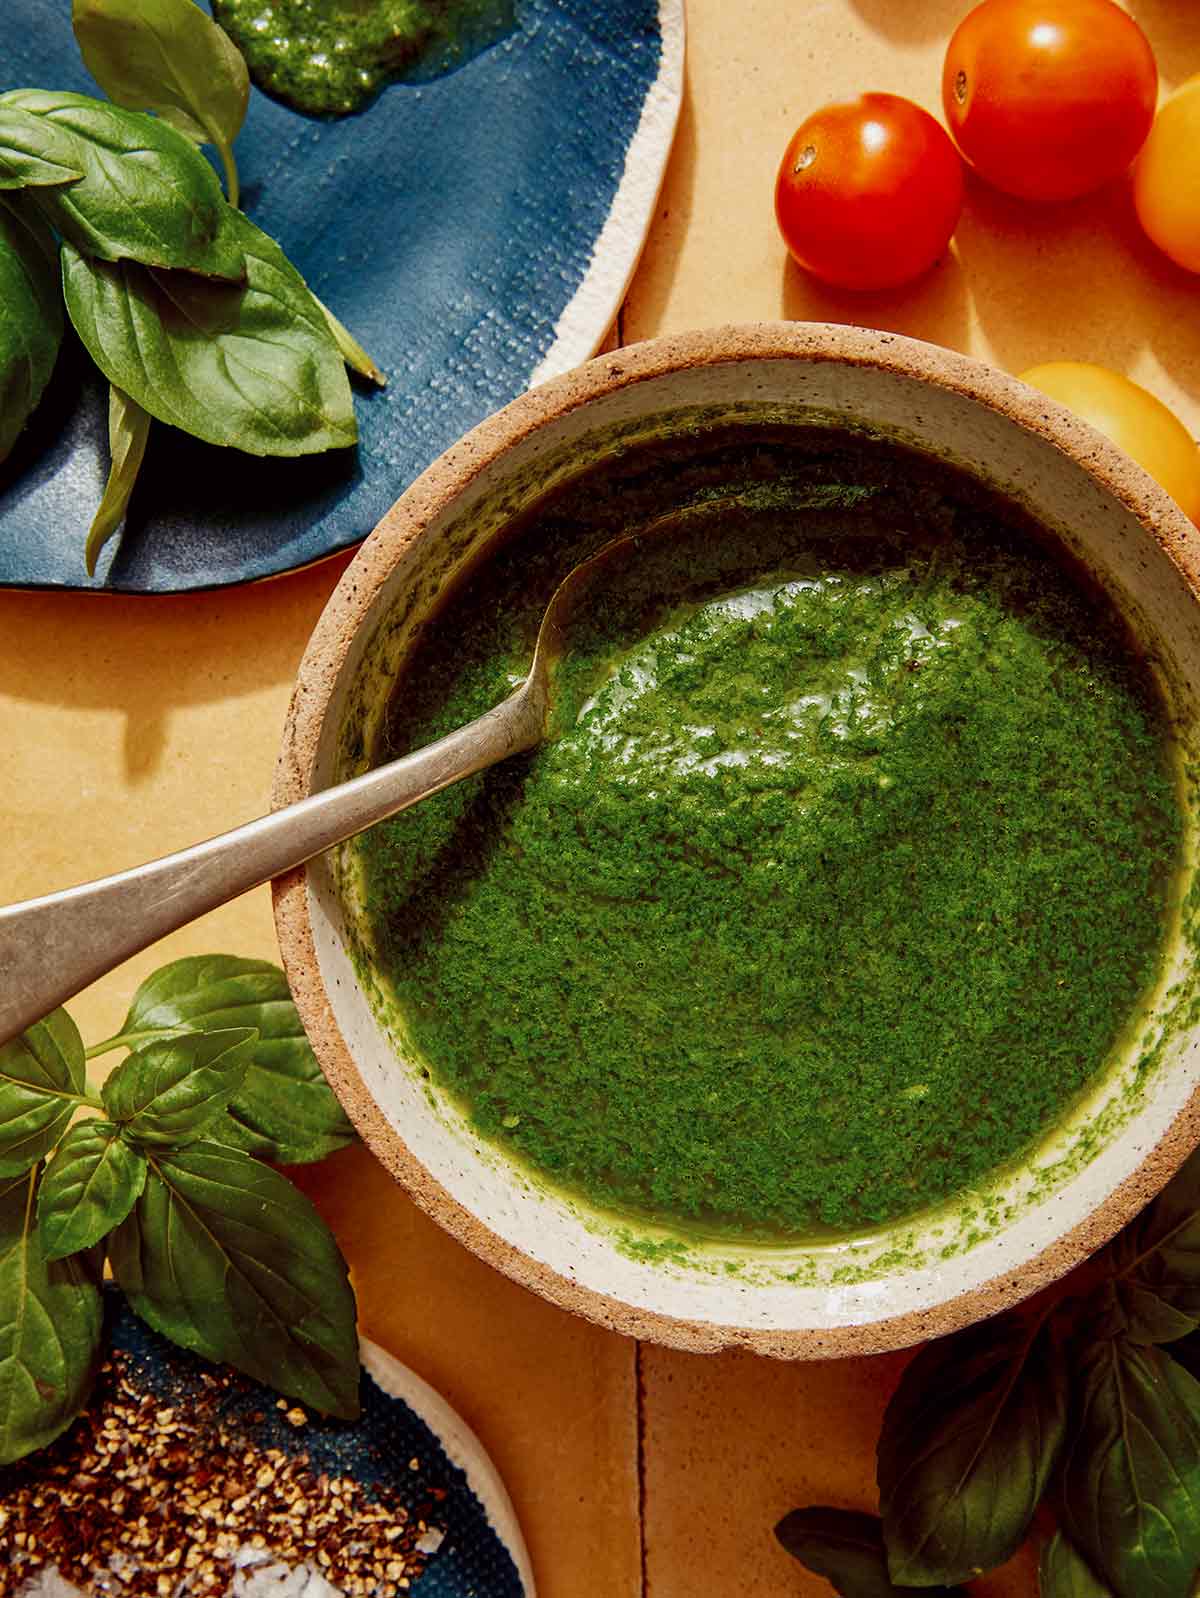 Basil vinaigrette recipe in a bowl ready to be drizzled on a salad.